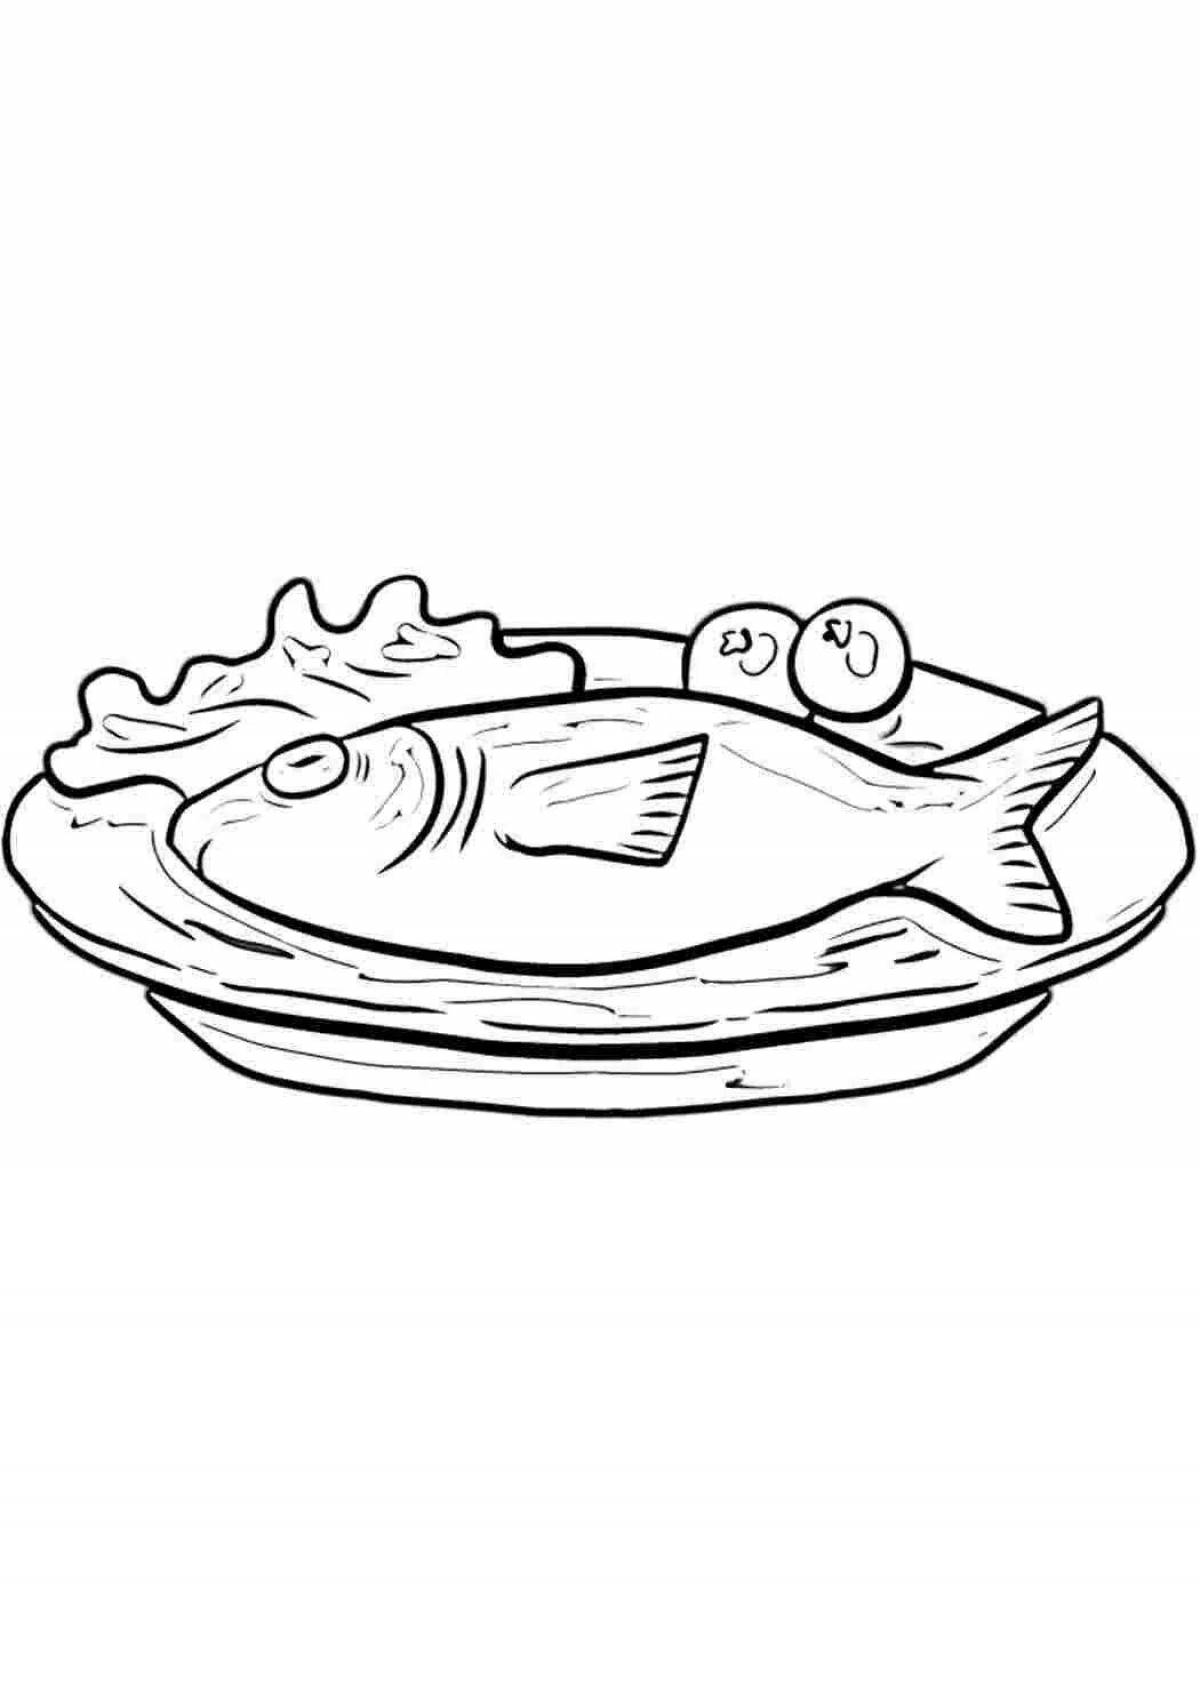 Grand fried fish coloring book